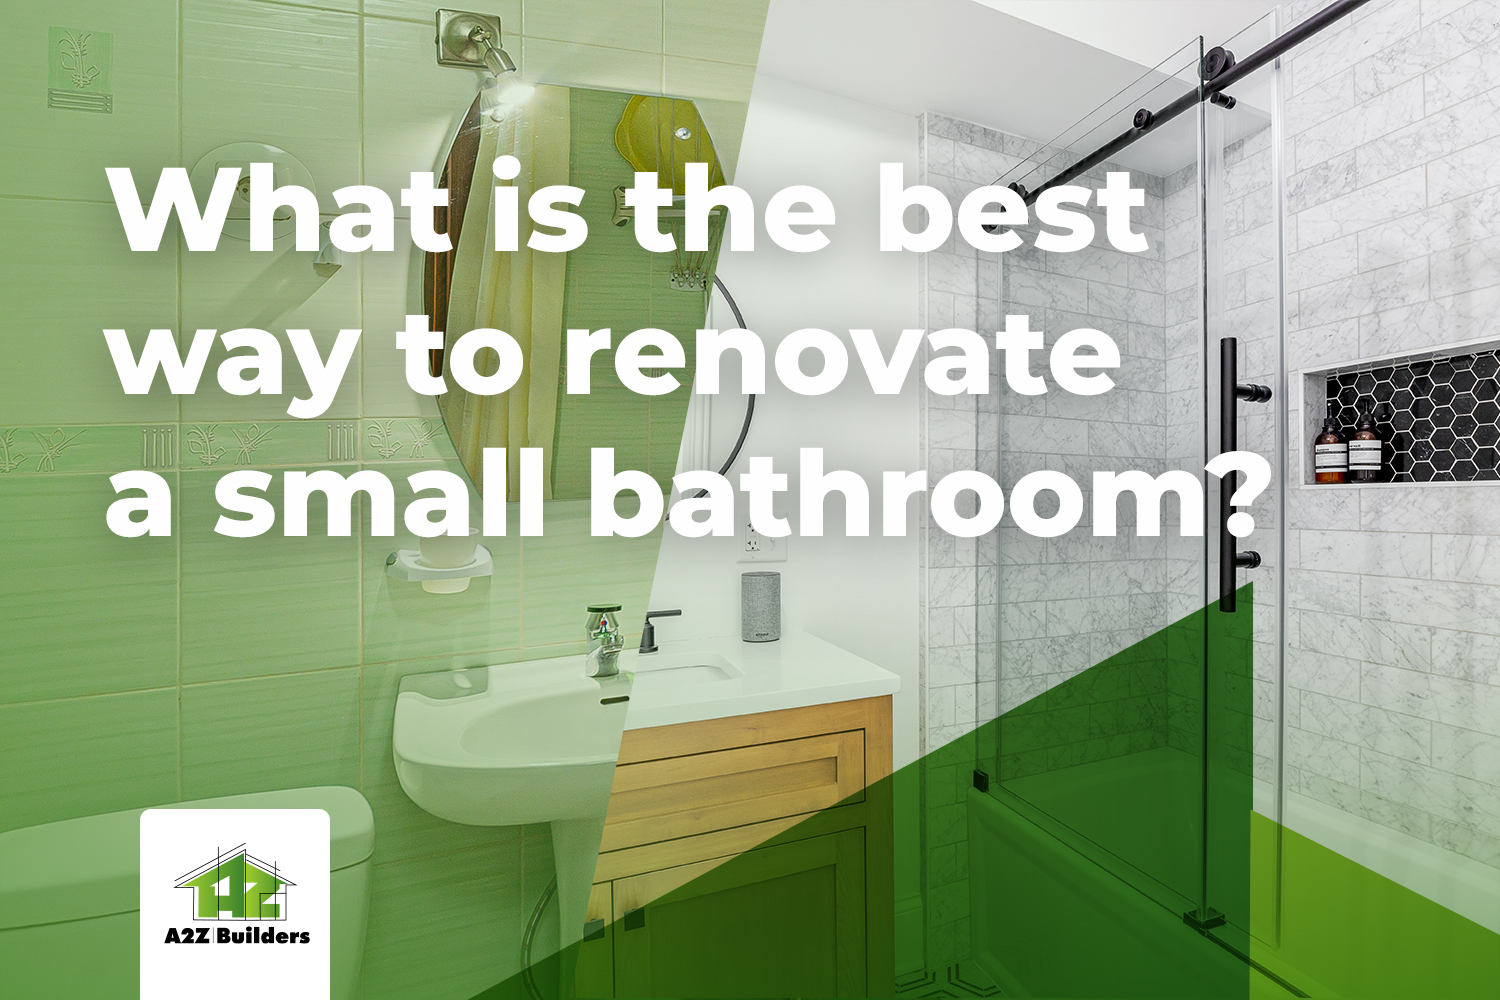 The best way to renovate your small bathroom